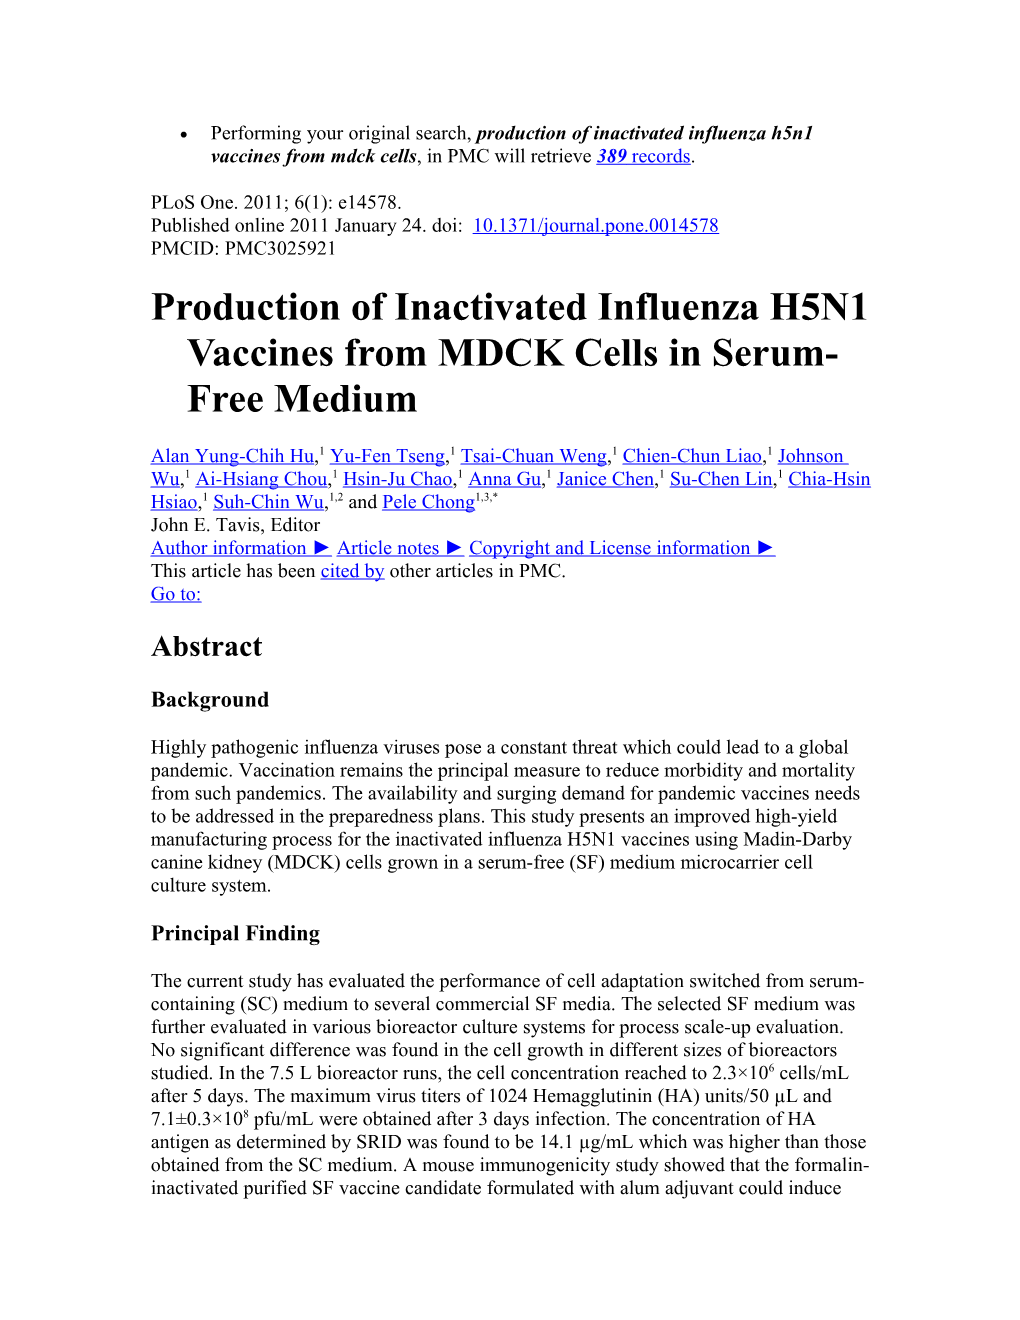 Production of Inactivated Influenza H5N1 Vaccines from MDCK Cells in Serum-Free Medium